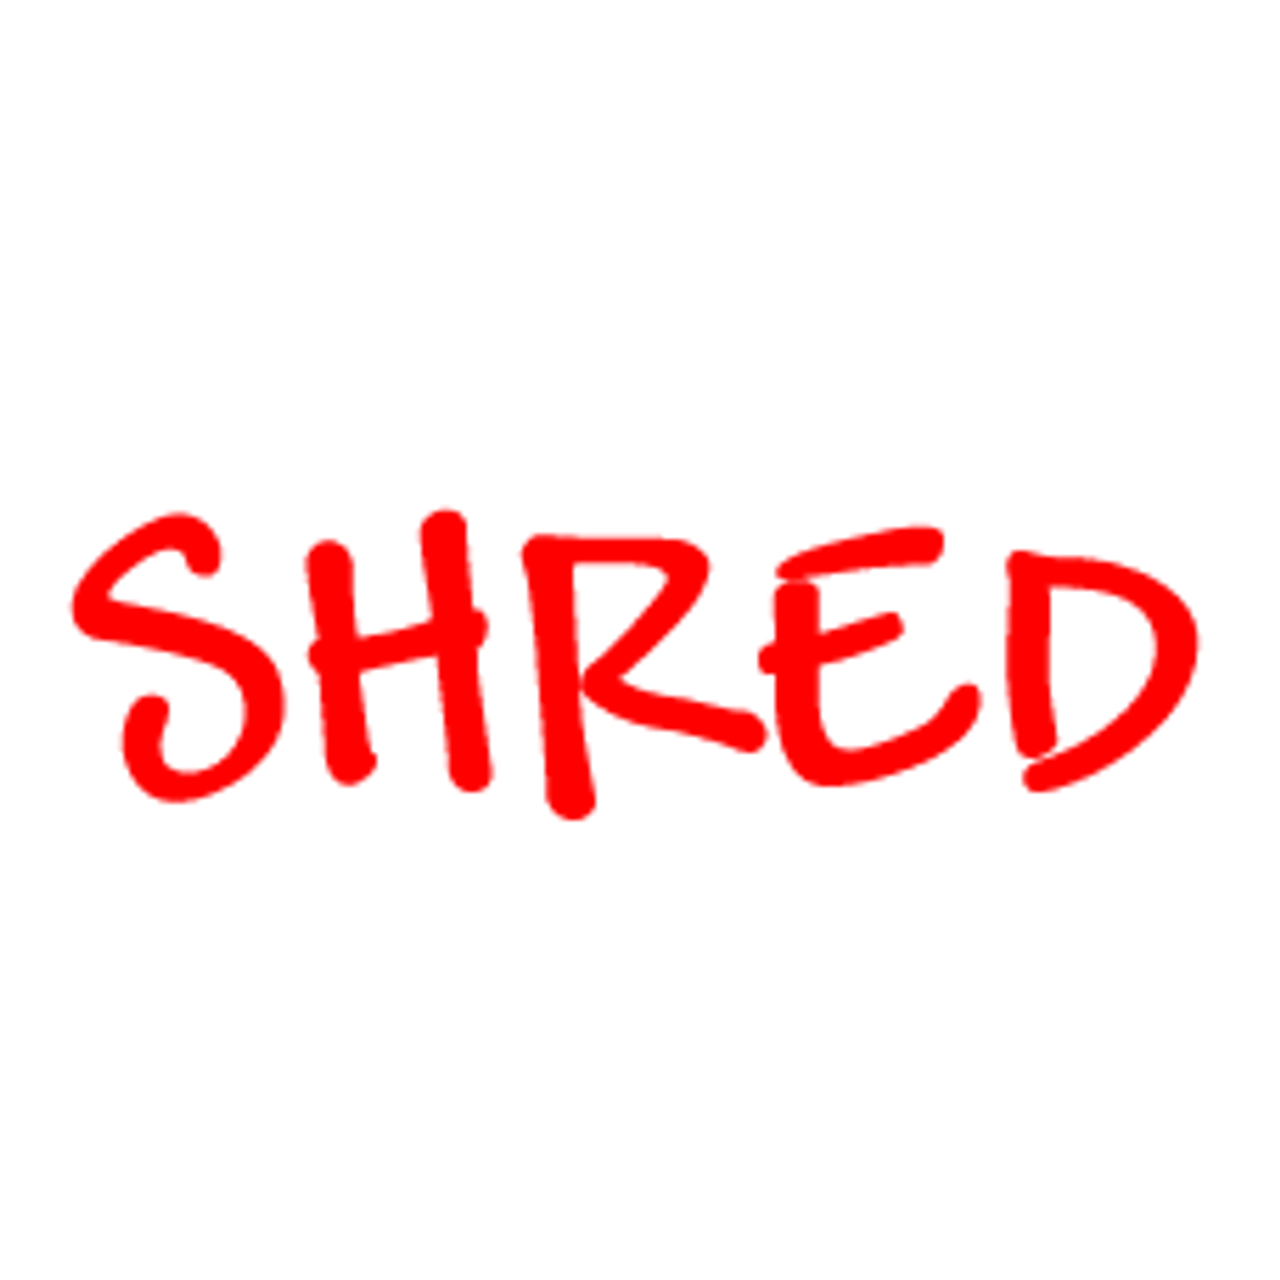 SHRED Rubber stamp for office use self-inking